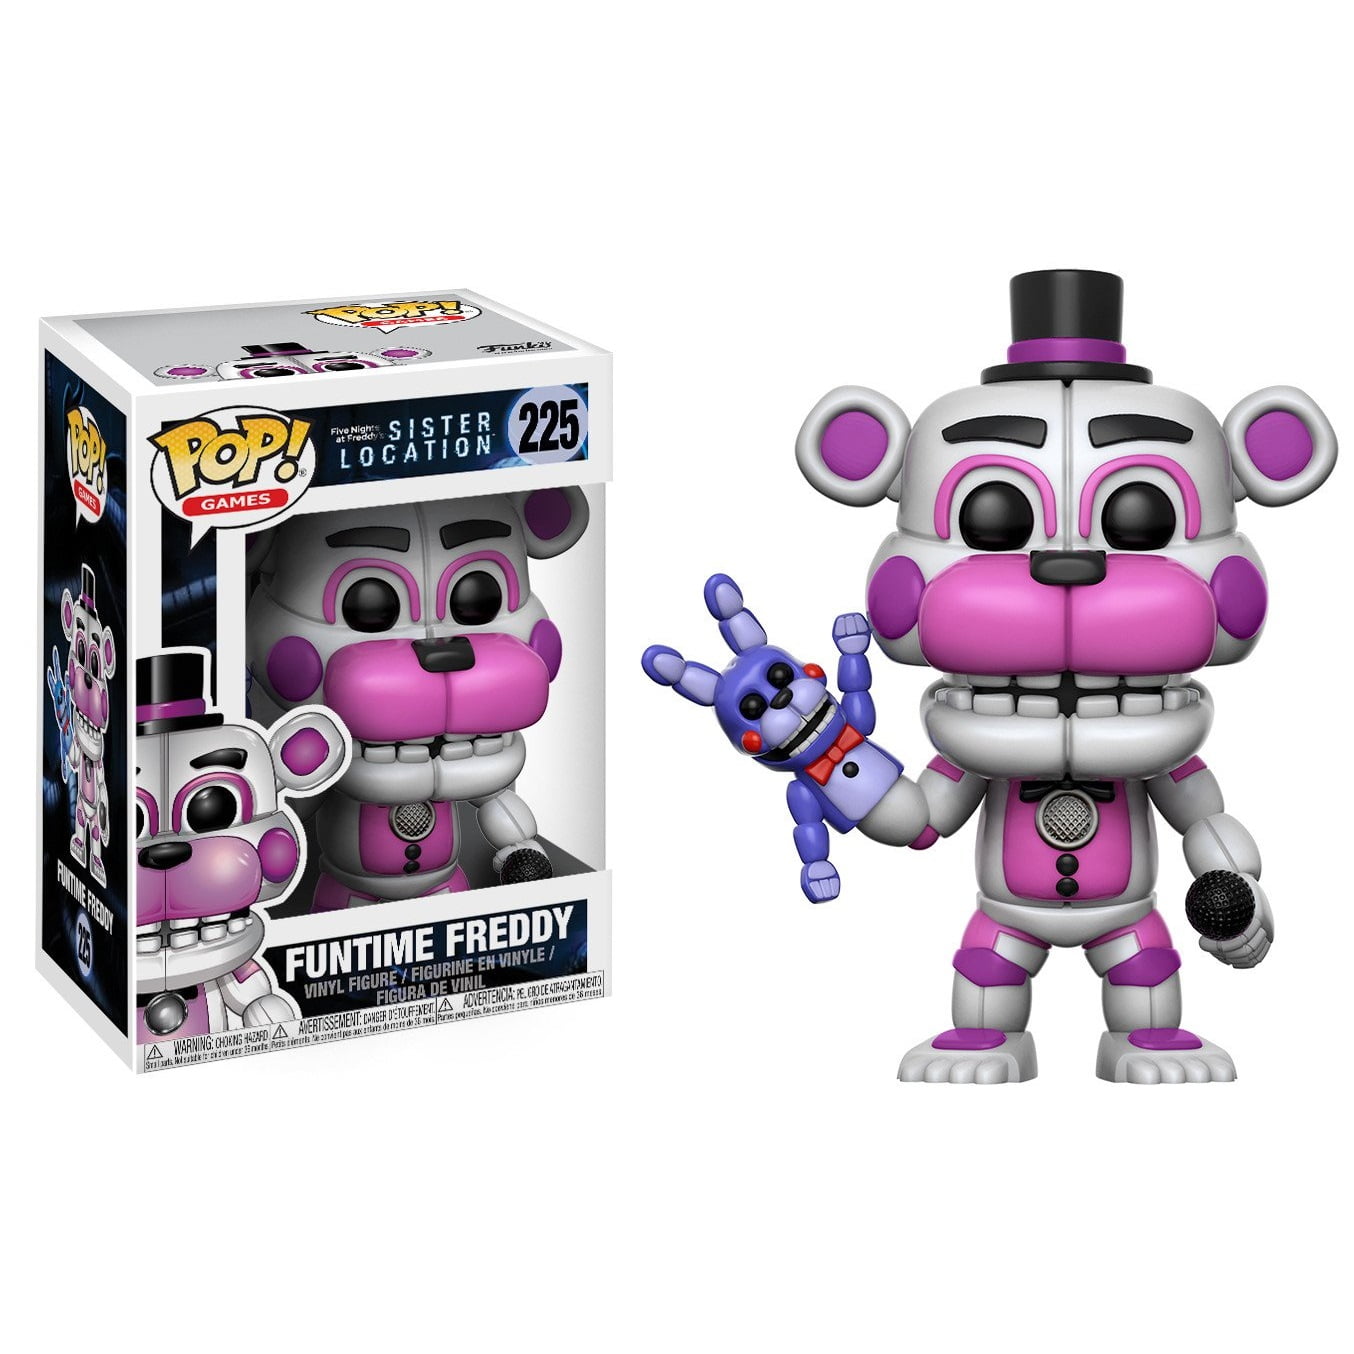 Funko Five Nights at Freddy's Sister Location Funtime Freddy 5 Inch Figure for sale online